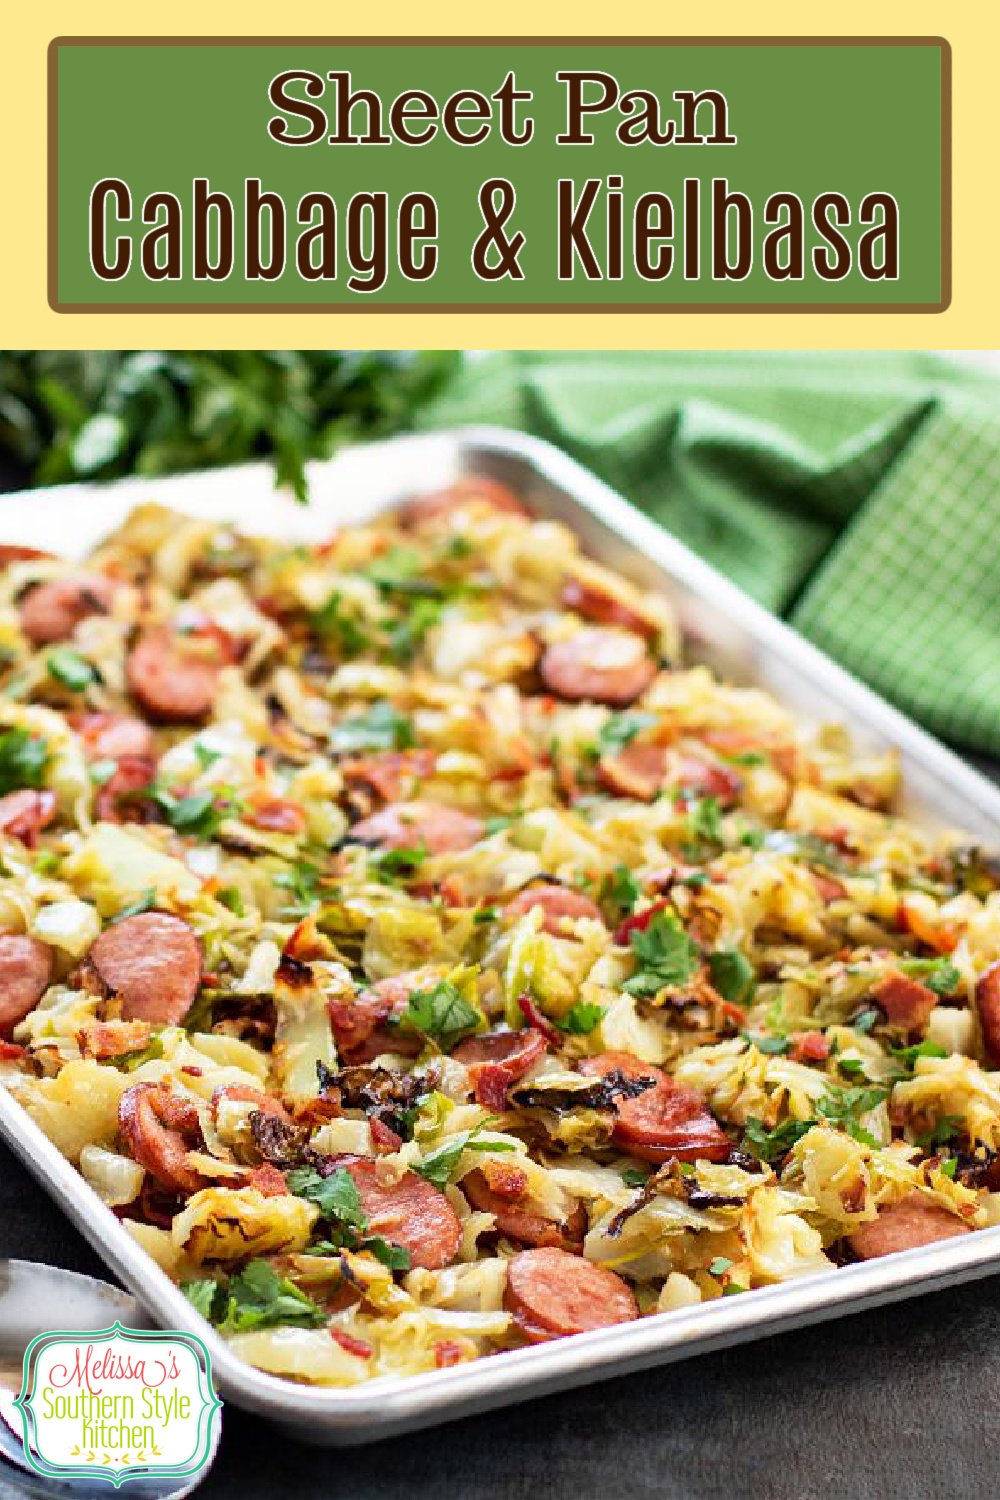 Sheet Pan Cabbage and Kielbasa can be served as a side dish or an entree for a stress free meal option on a busy day #sheetpanmeals #sheetpancabbageandkielbasa #cabbagerecipes #lowcarbrecipes #easyrecipes #southernrecipes #kielbasa #cabbage #braisedcabbage